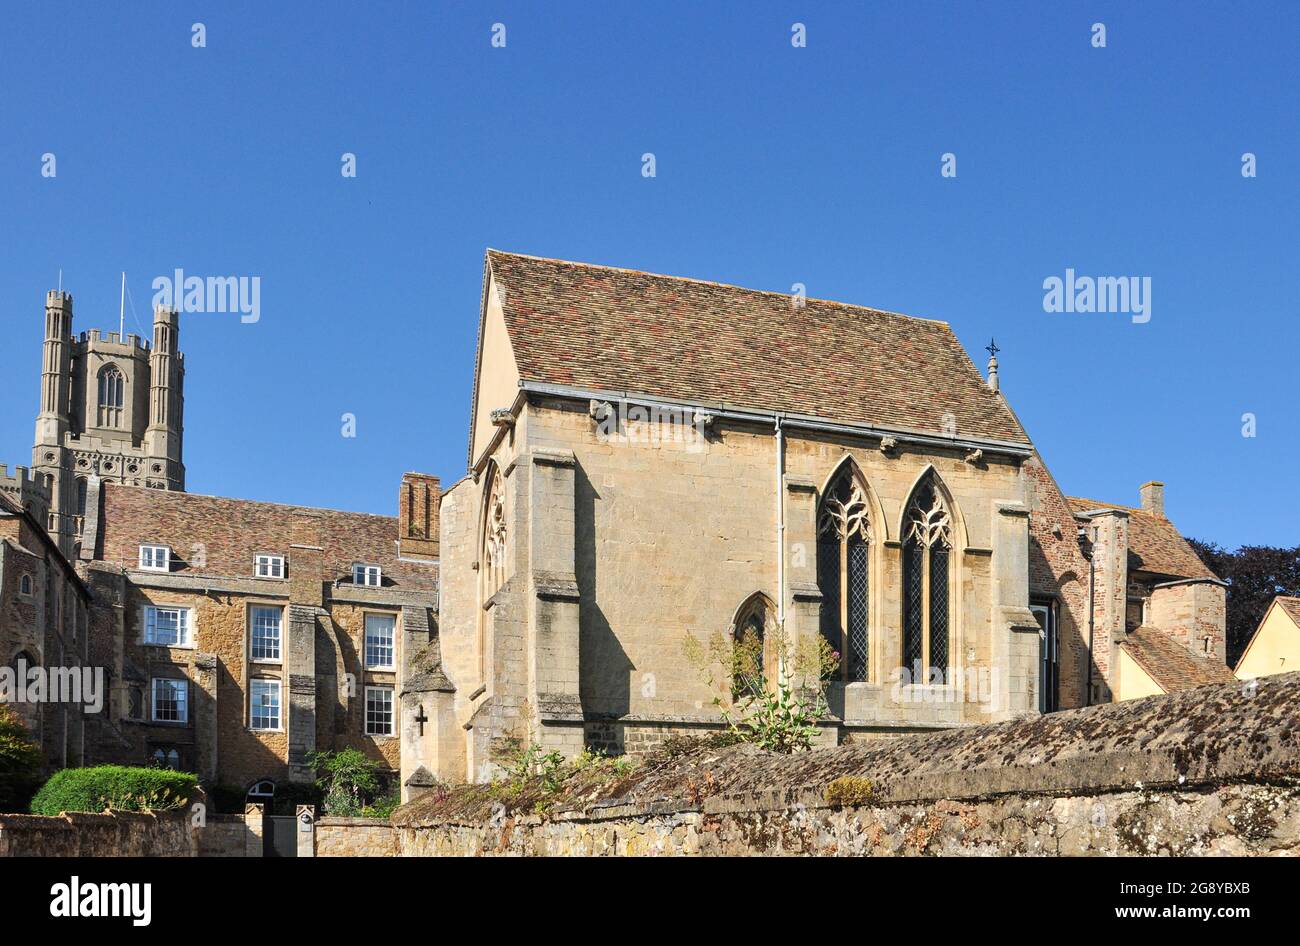 Prior Crauden's Chapel (built in 1321 close to Ely Cathedral and used by the King's School), Ely, Cambridgeshire, England, UK Stock Photo